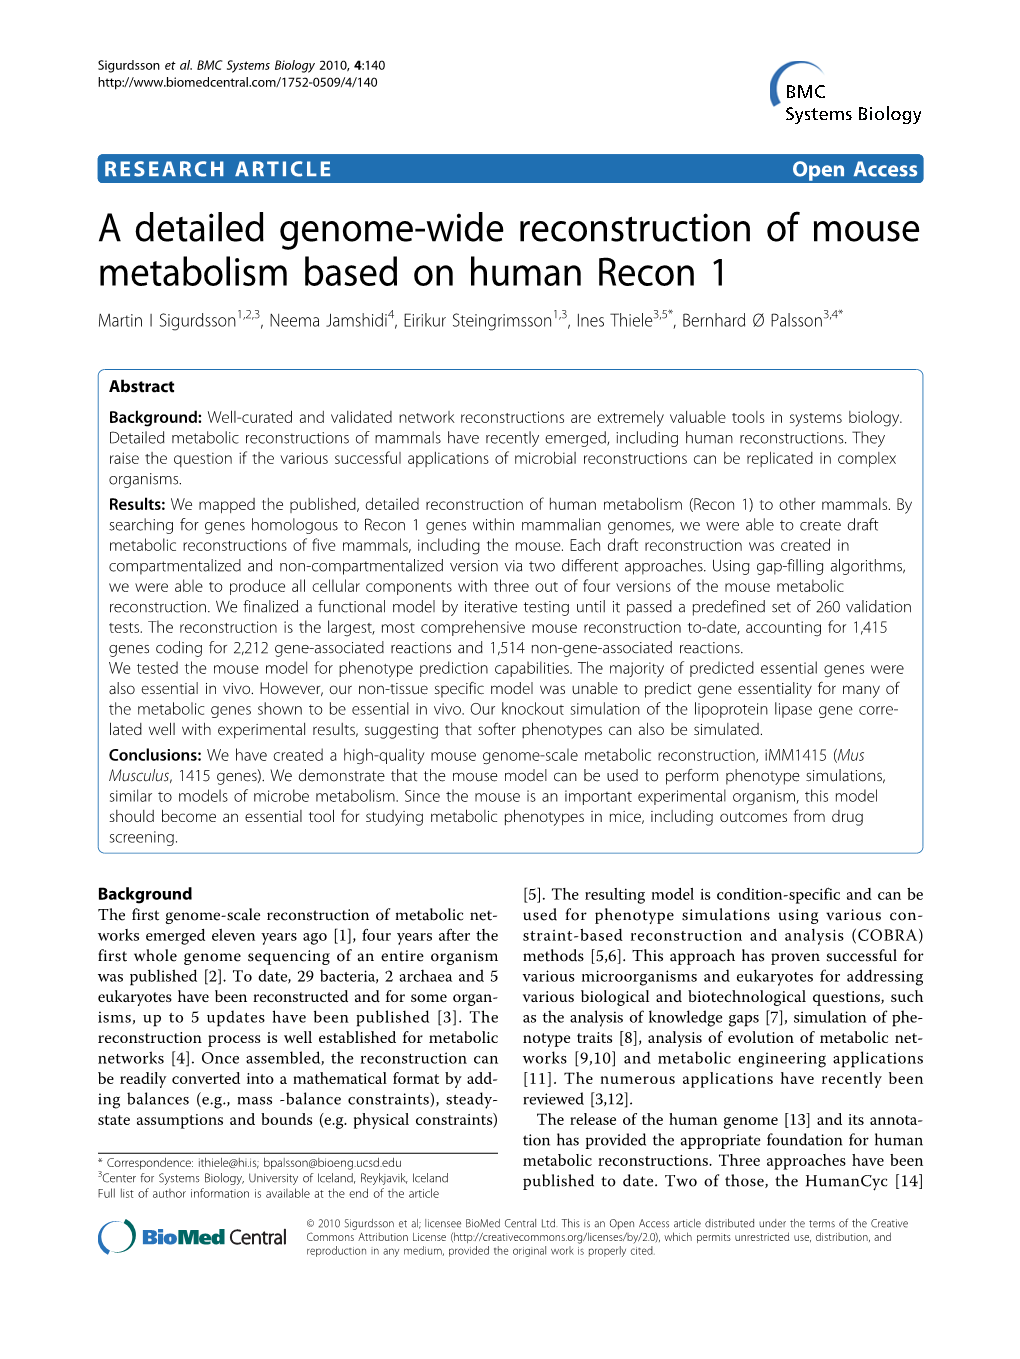 A Detailed Genome-Wide Reconstruction of Mouse Metabolism Based on Human Recon 1